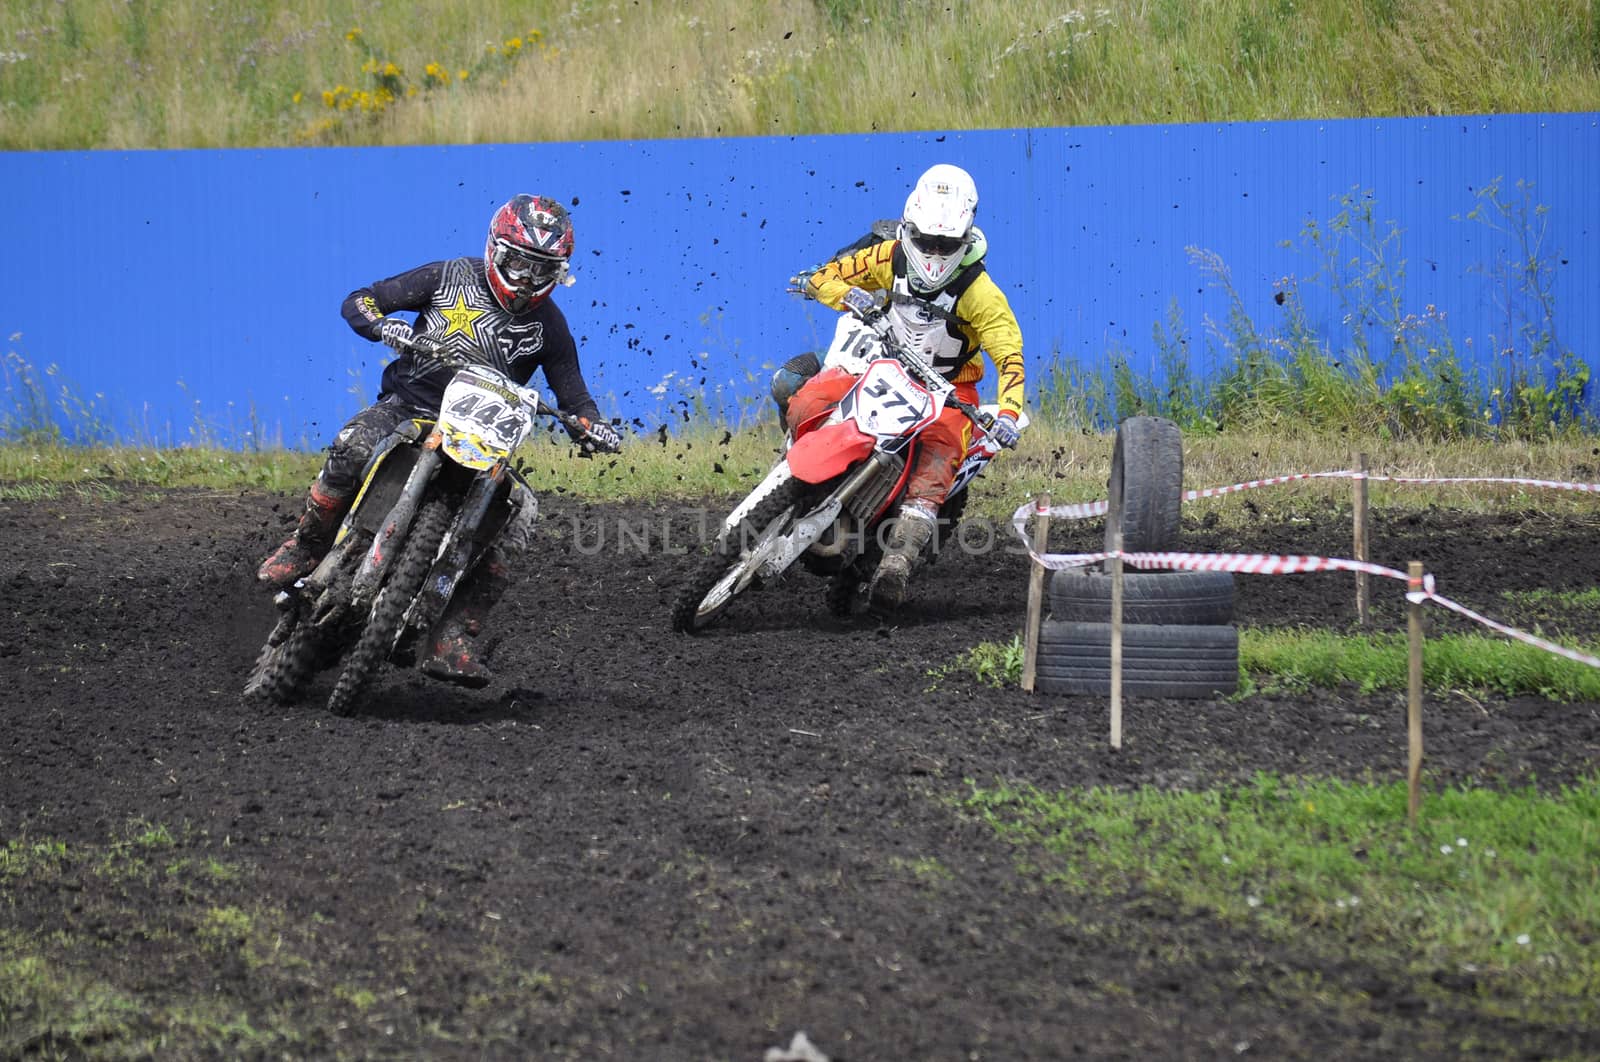 Racers on motorcycles participate in cross-country race competit by veronka72